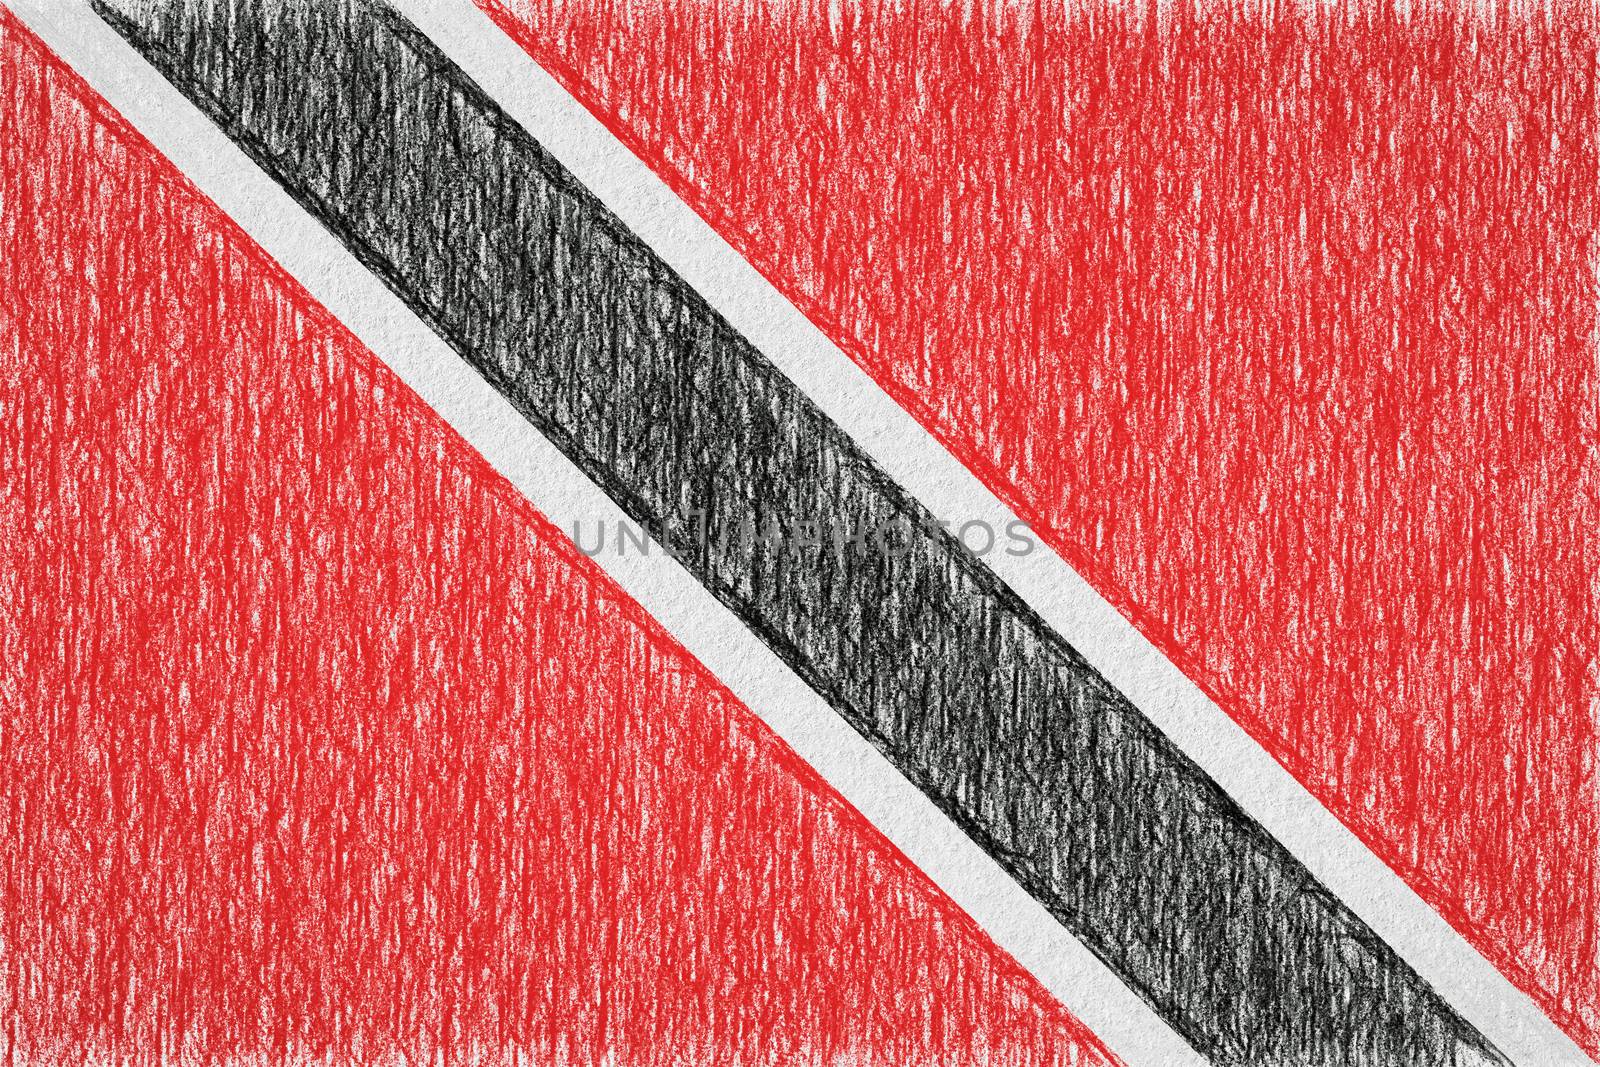 Trinidad and Tobago painted flag. Patriotic drawing on paper background. National flag of Trinidad and Tobago